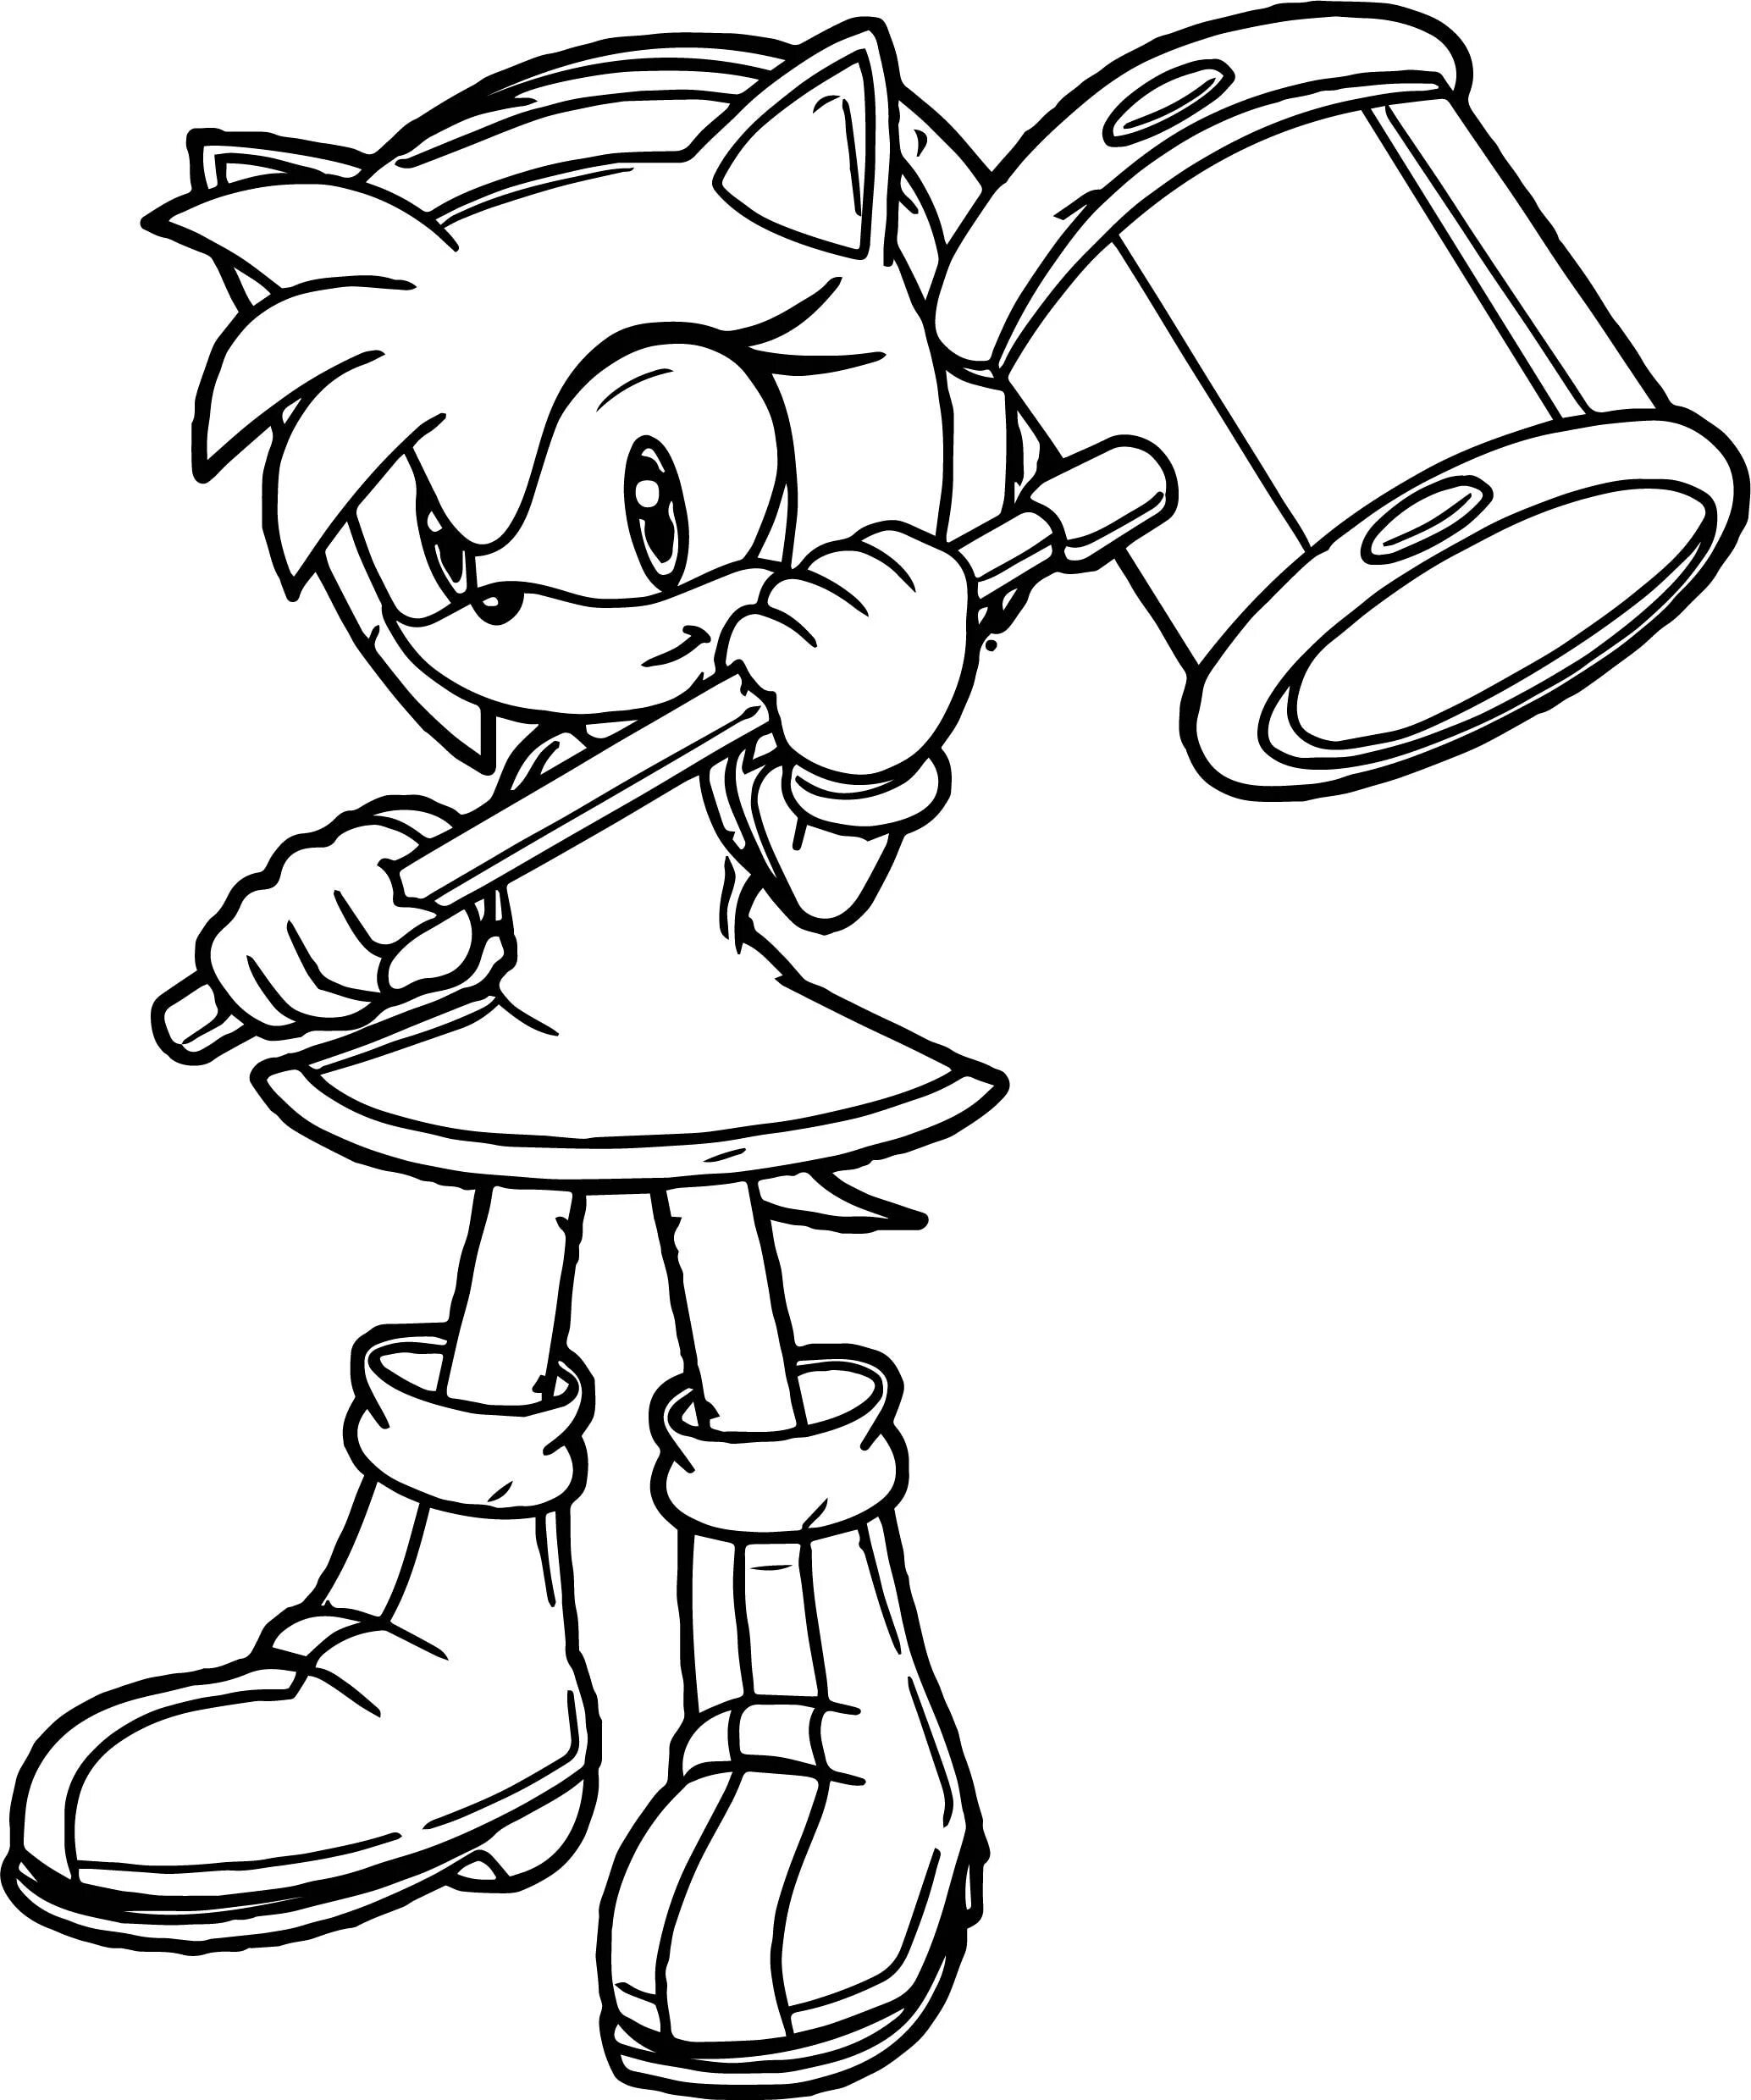 Coloring page enthusiastic amy